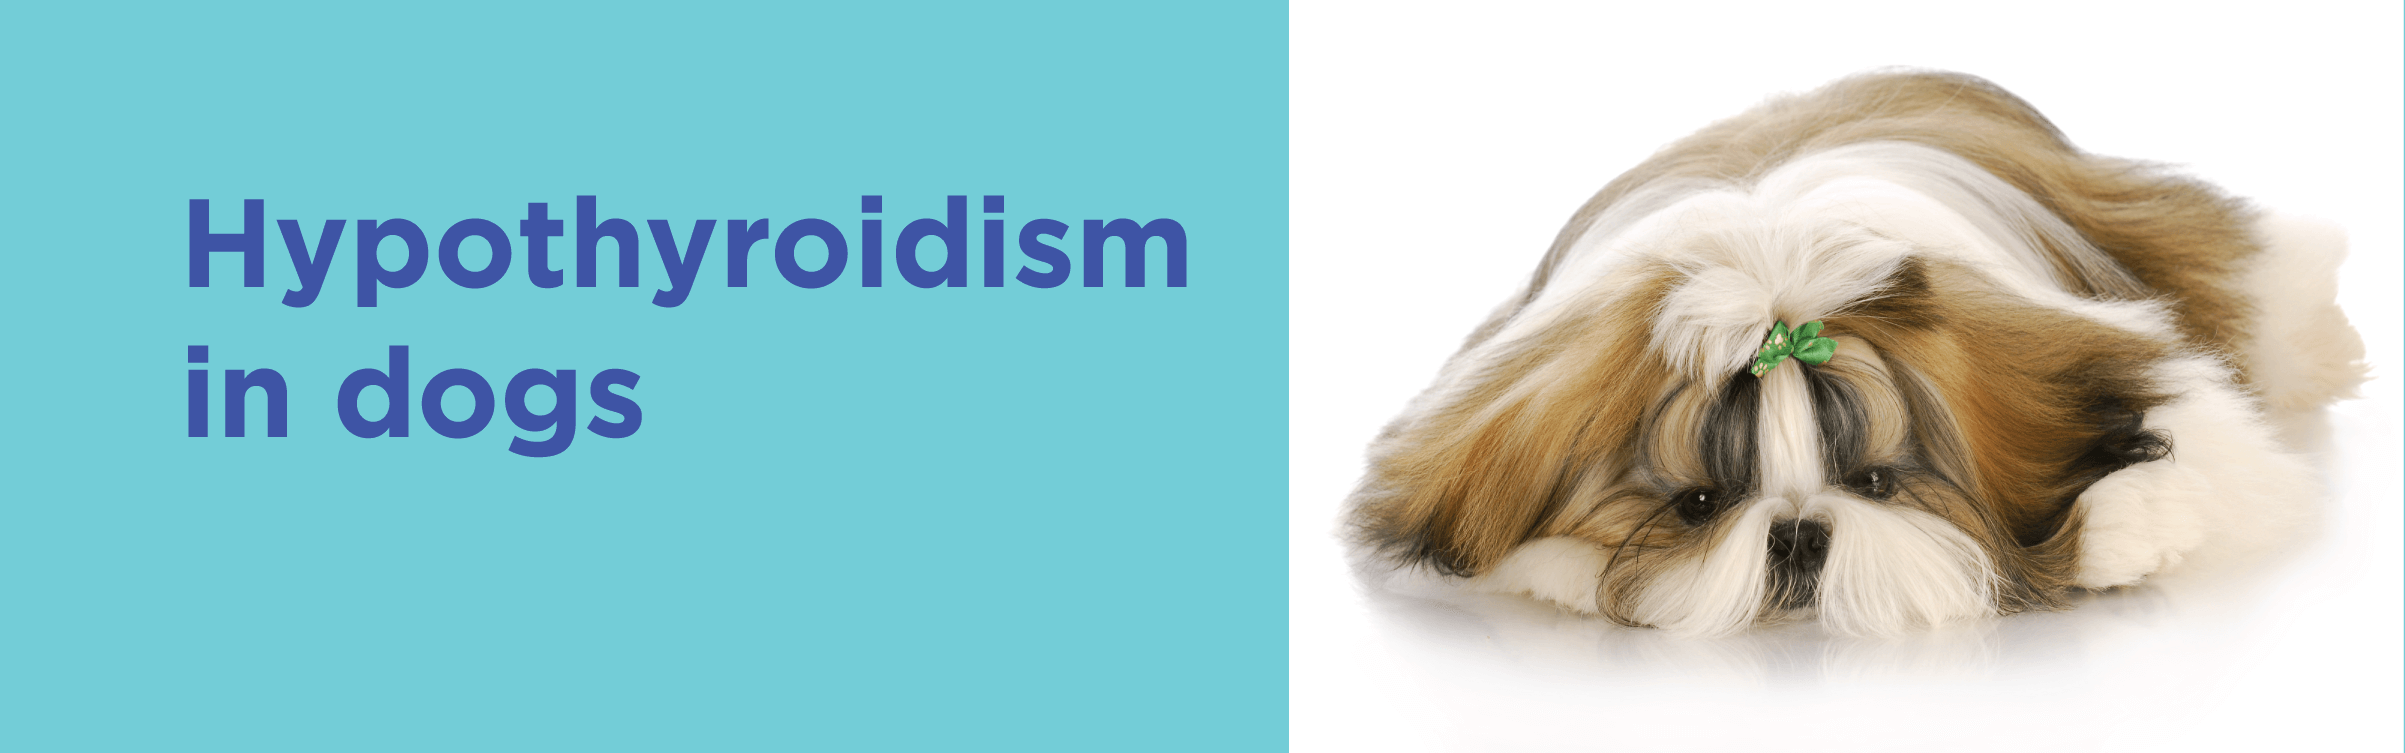 Hypothyroidism in dogs